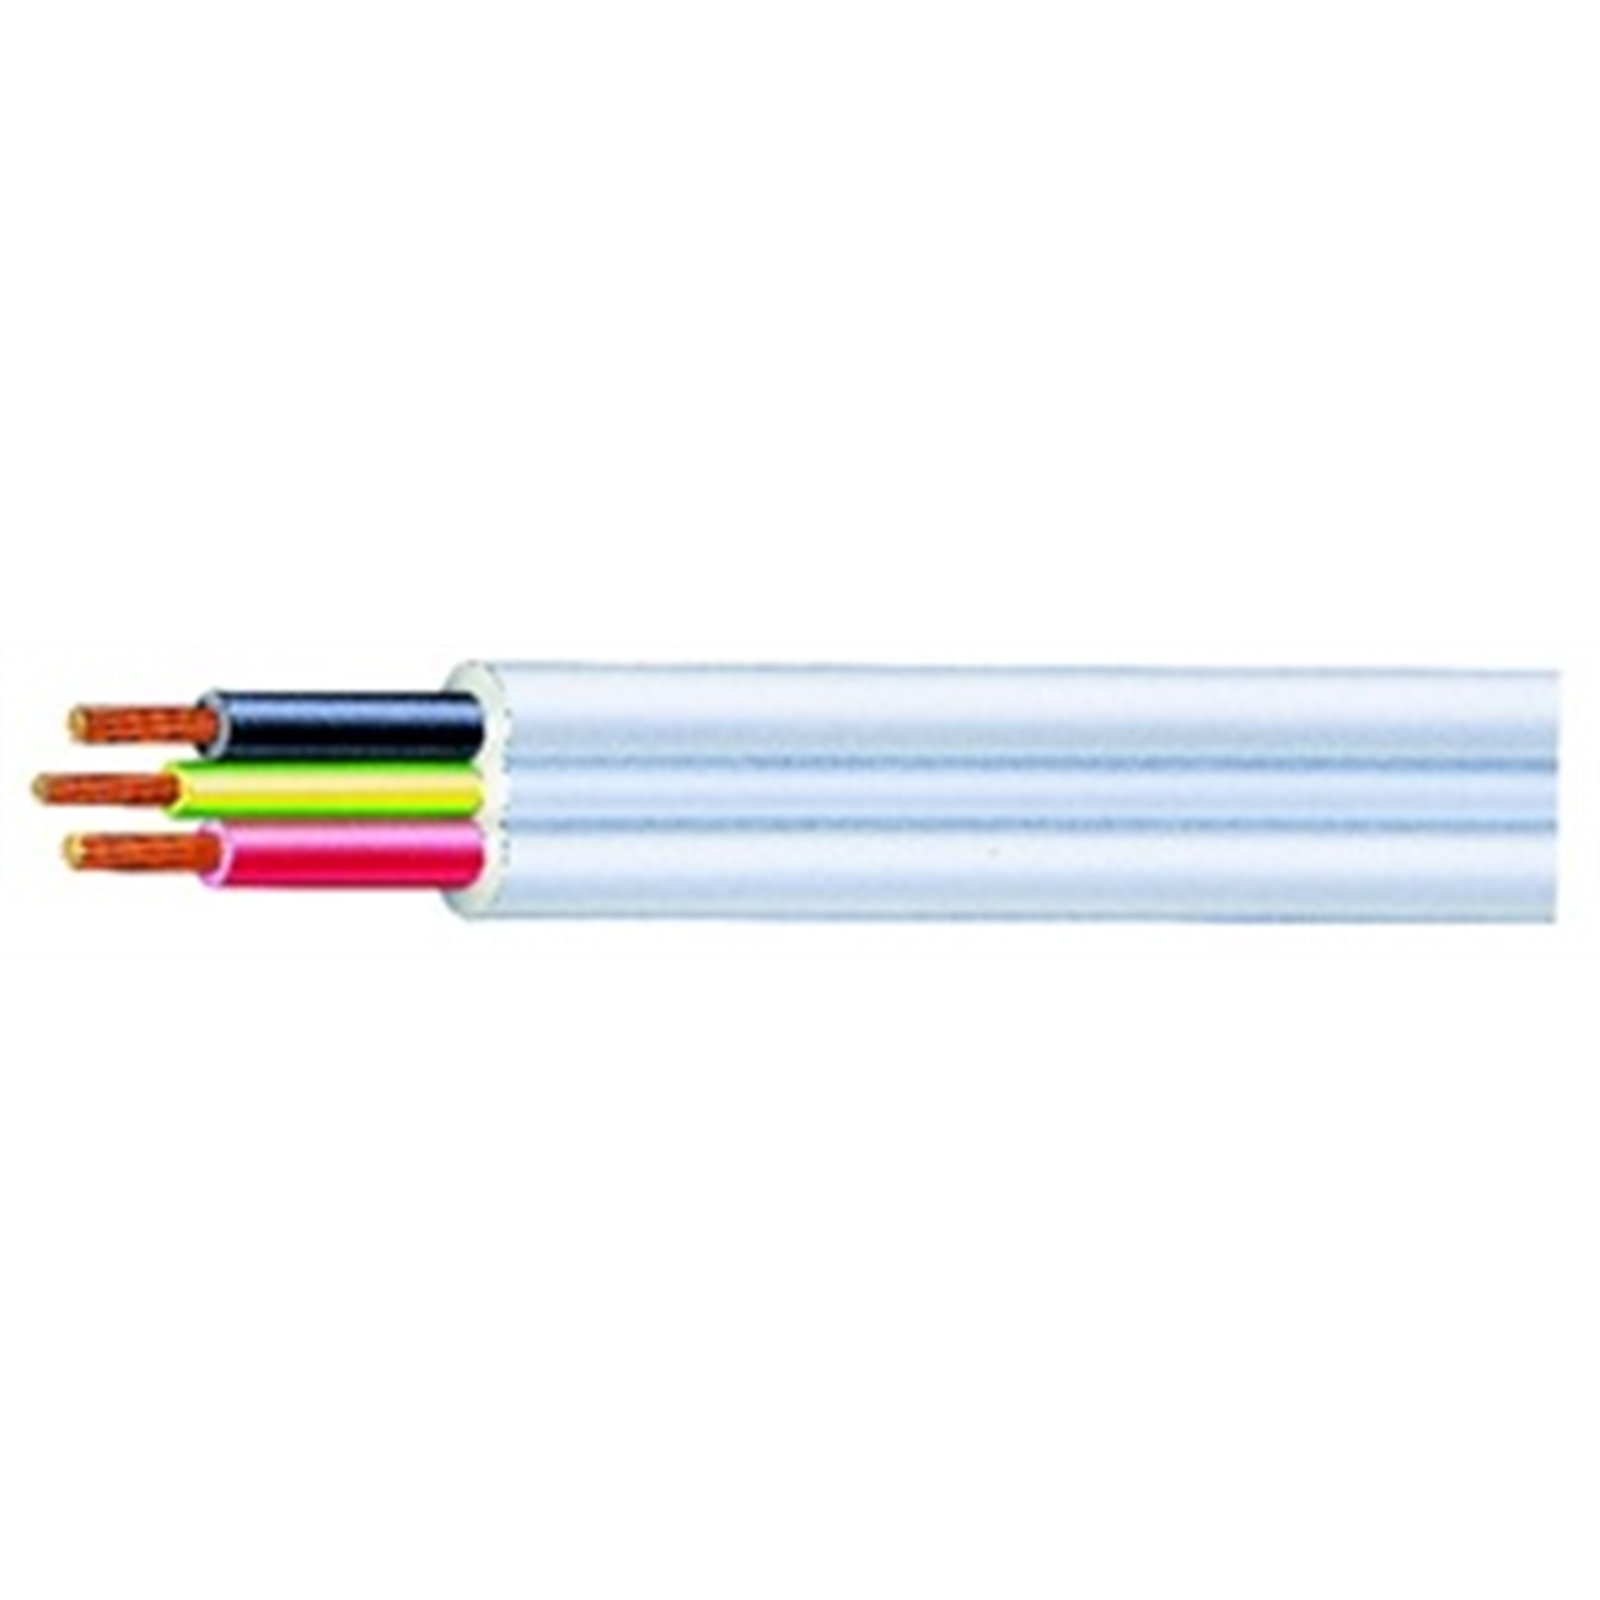 Cable Elect Twin&earth Flt P/m 2.5mm Cncp07aa002wvaa